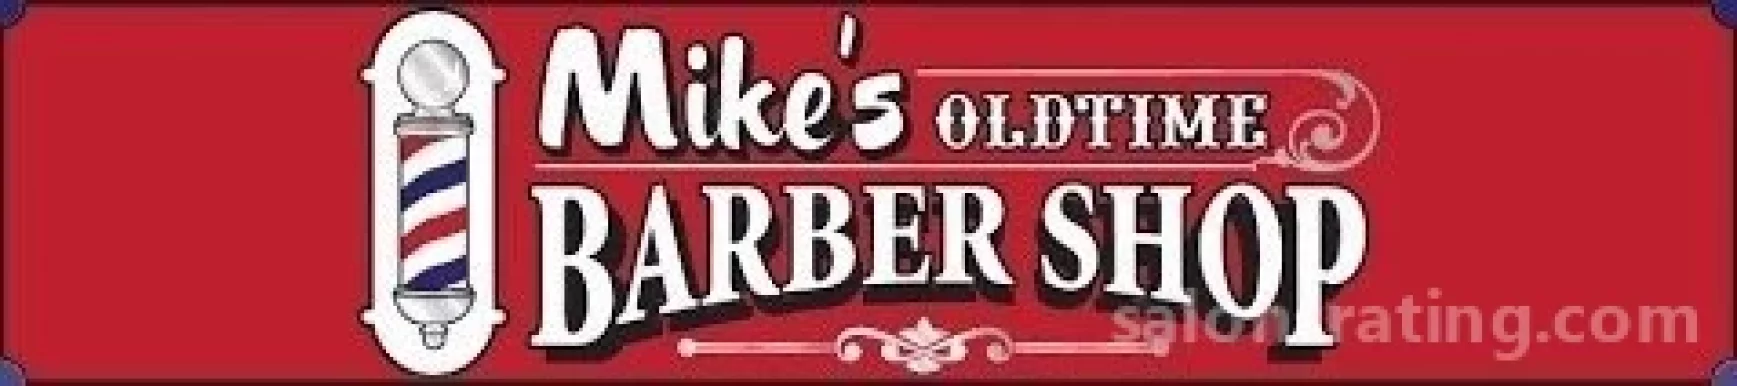 Mike's Barber Shop, Chicago - Photo 5